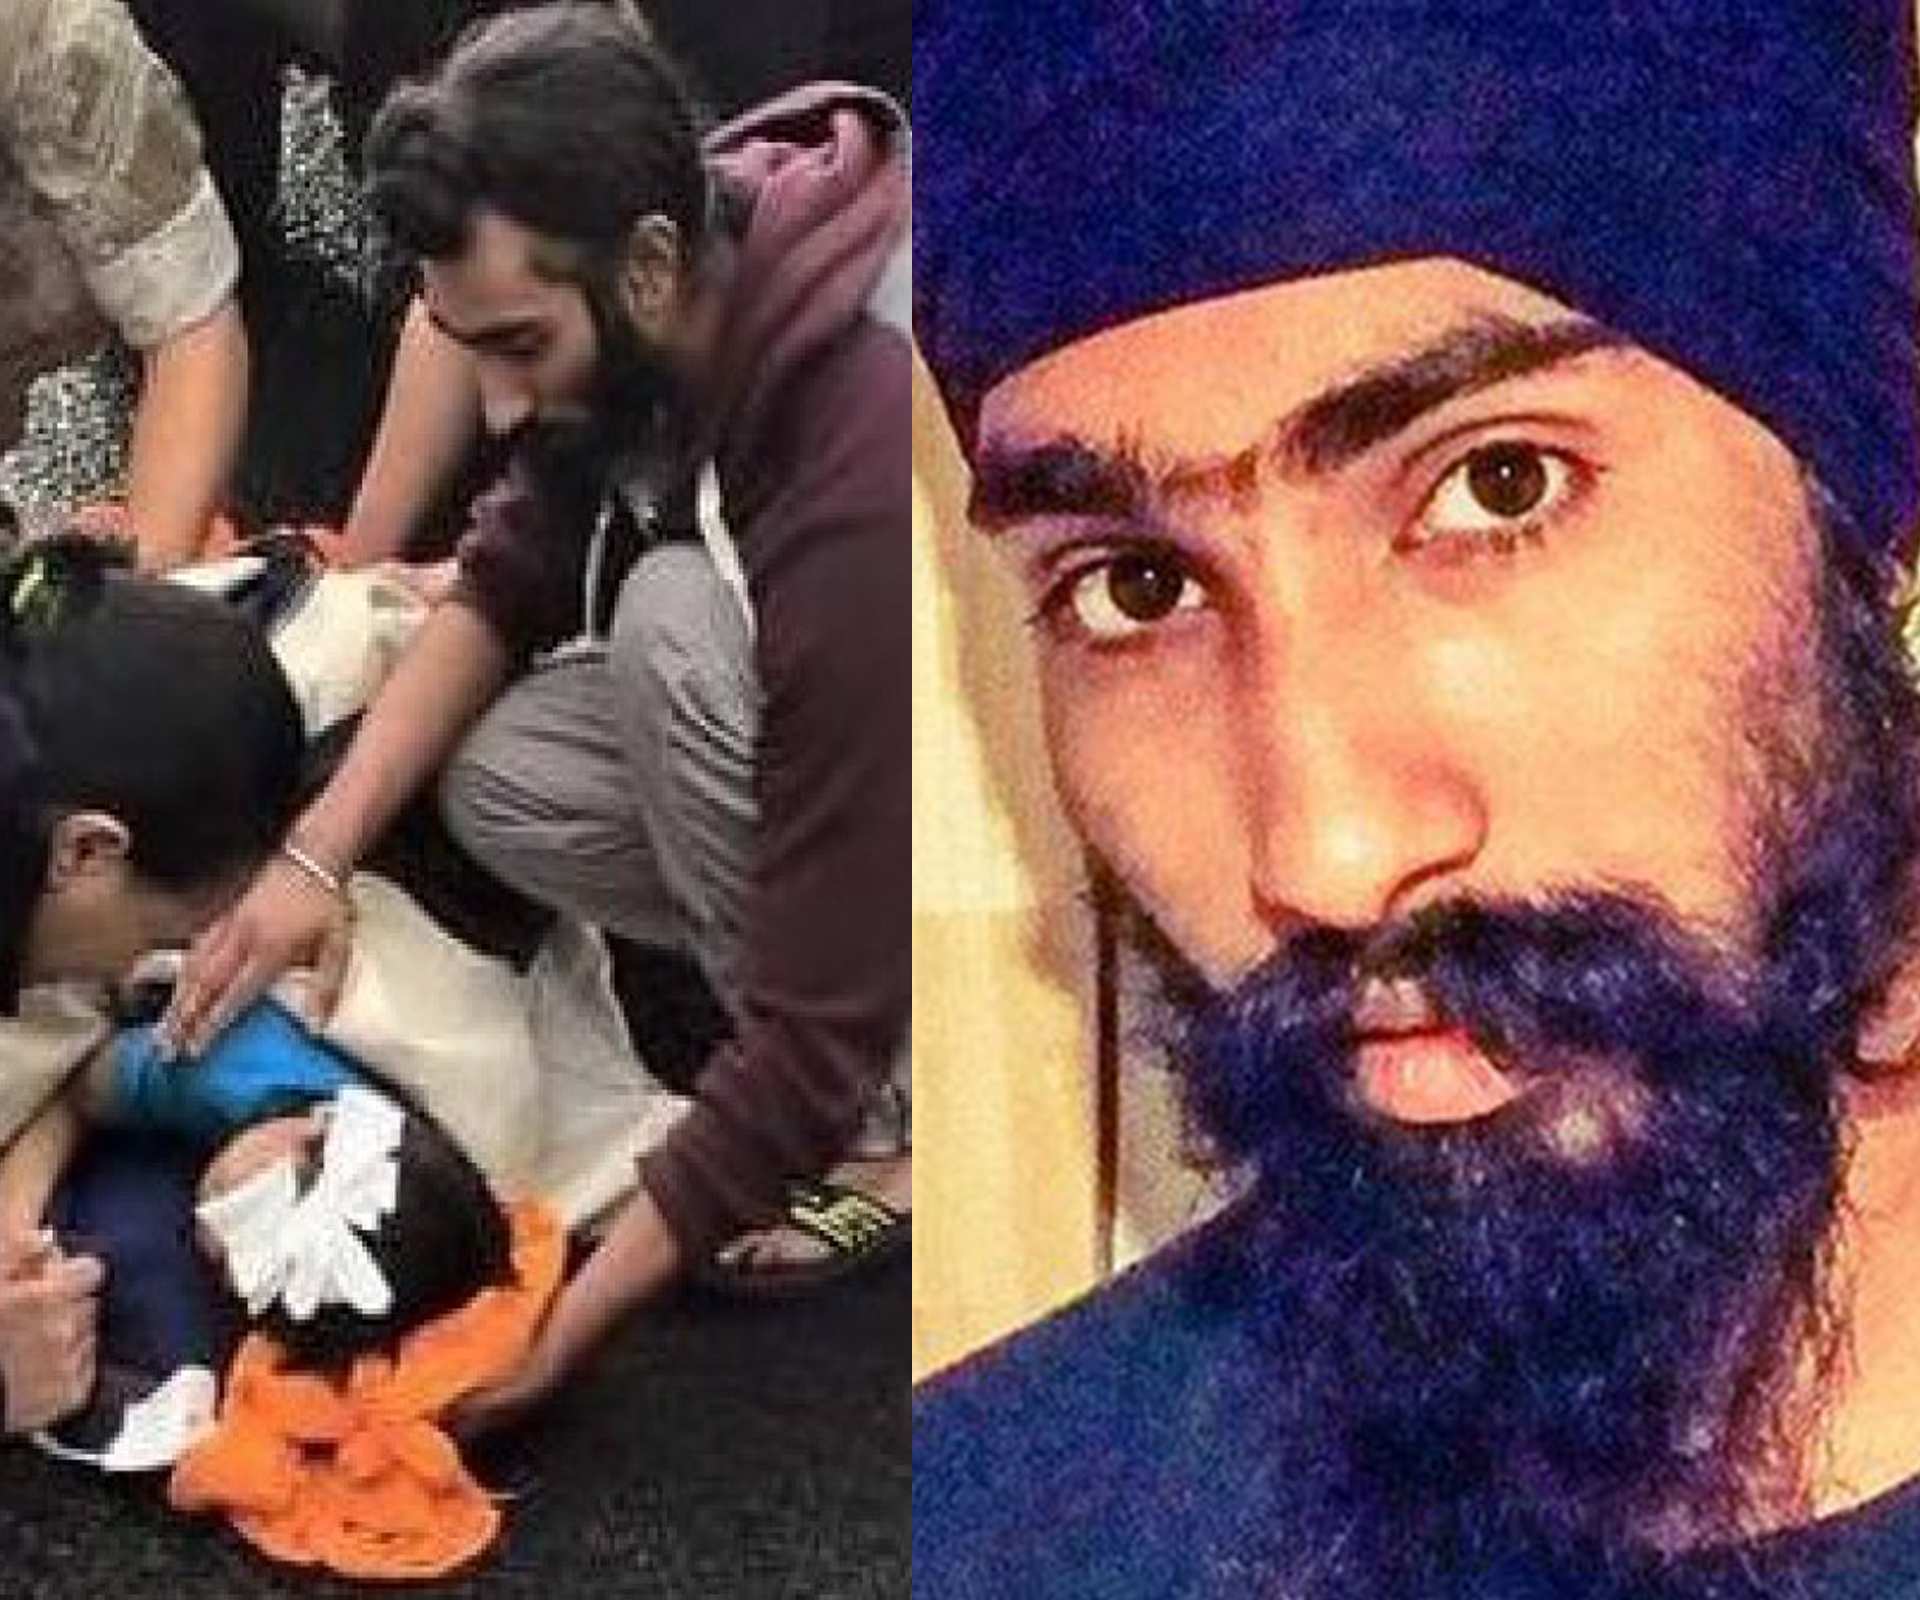 Karma comes around for the Sikh man who removed his turban to save a boy’s life